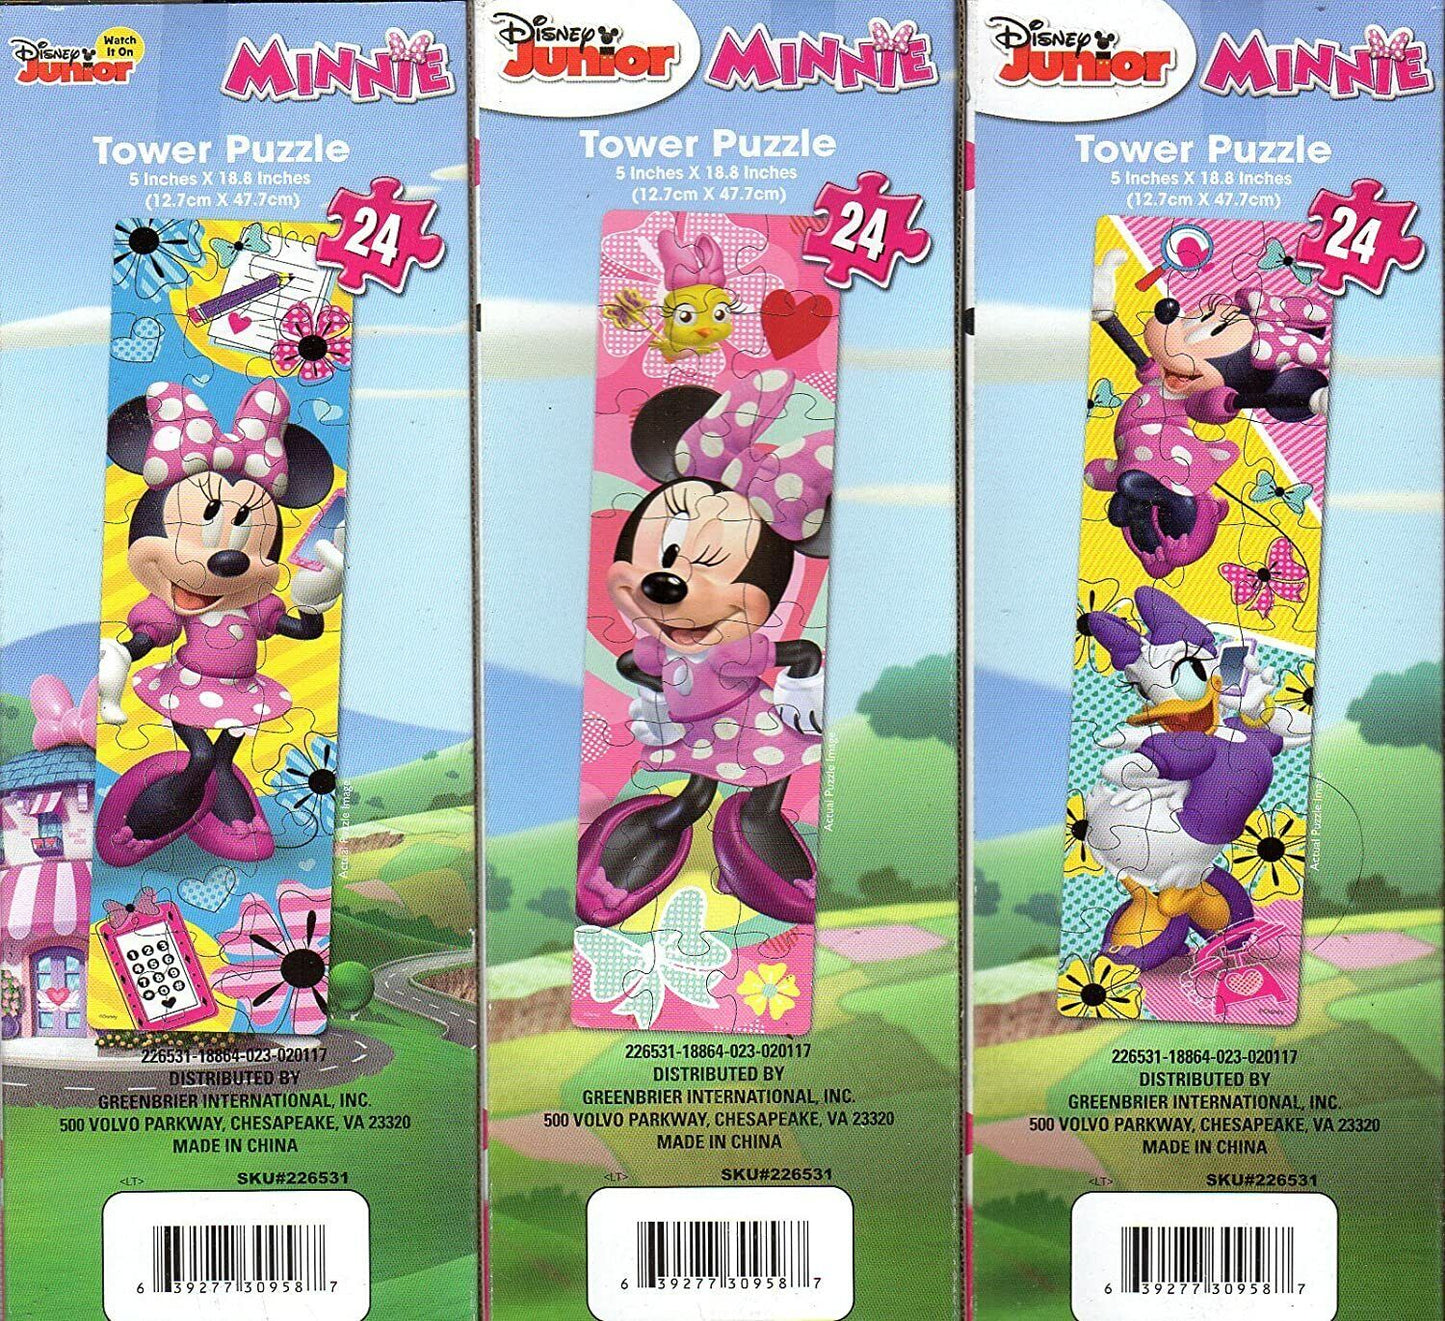 Cardinal Disney Minnie Mouse - 24 Piece Tower Jigsaw Puzzle - (Set of 3 Puzzles)